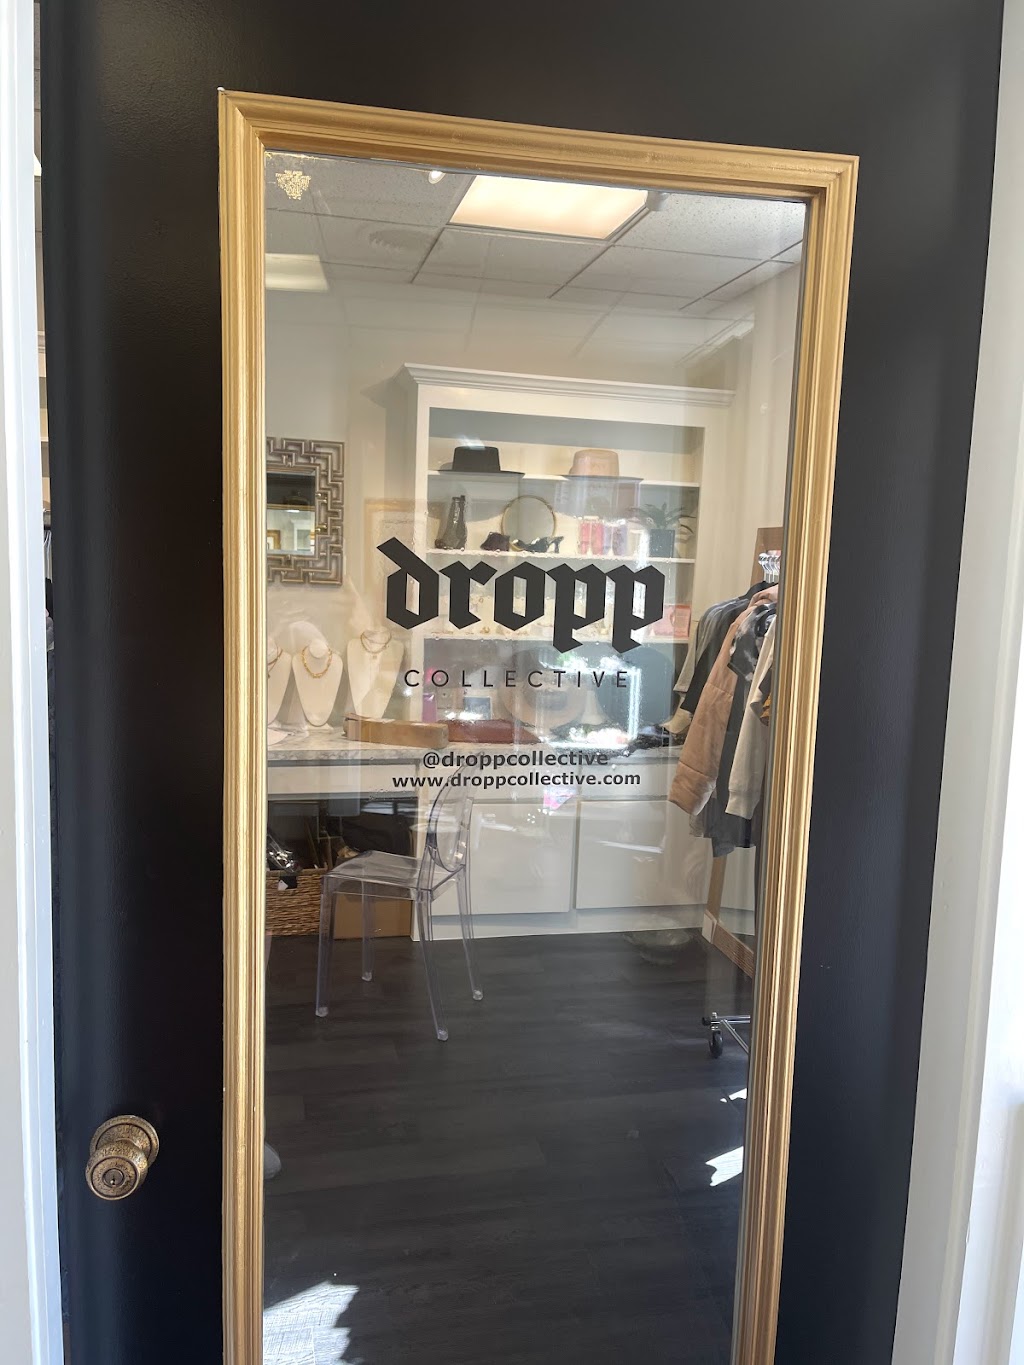 Dropp Collective | 3608 Pershing Ave # 1, Fort Worth, TX 76107 | Phone: (682) 224-3533